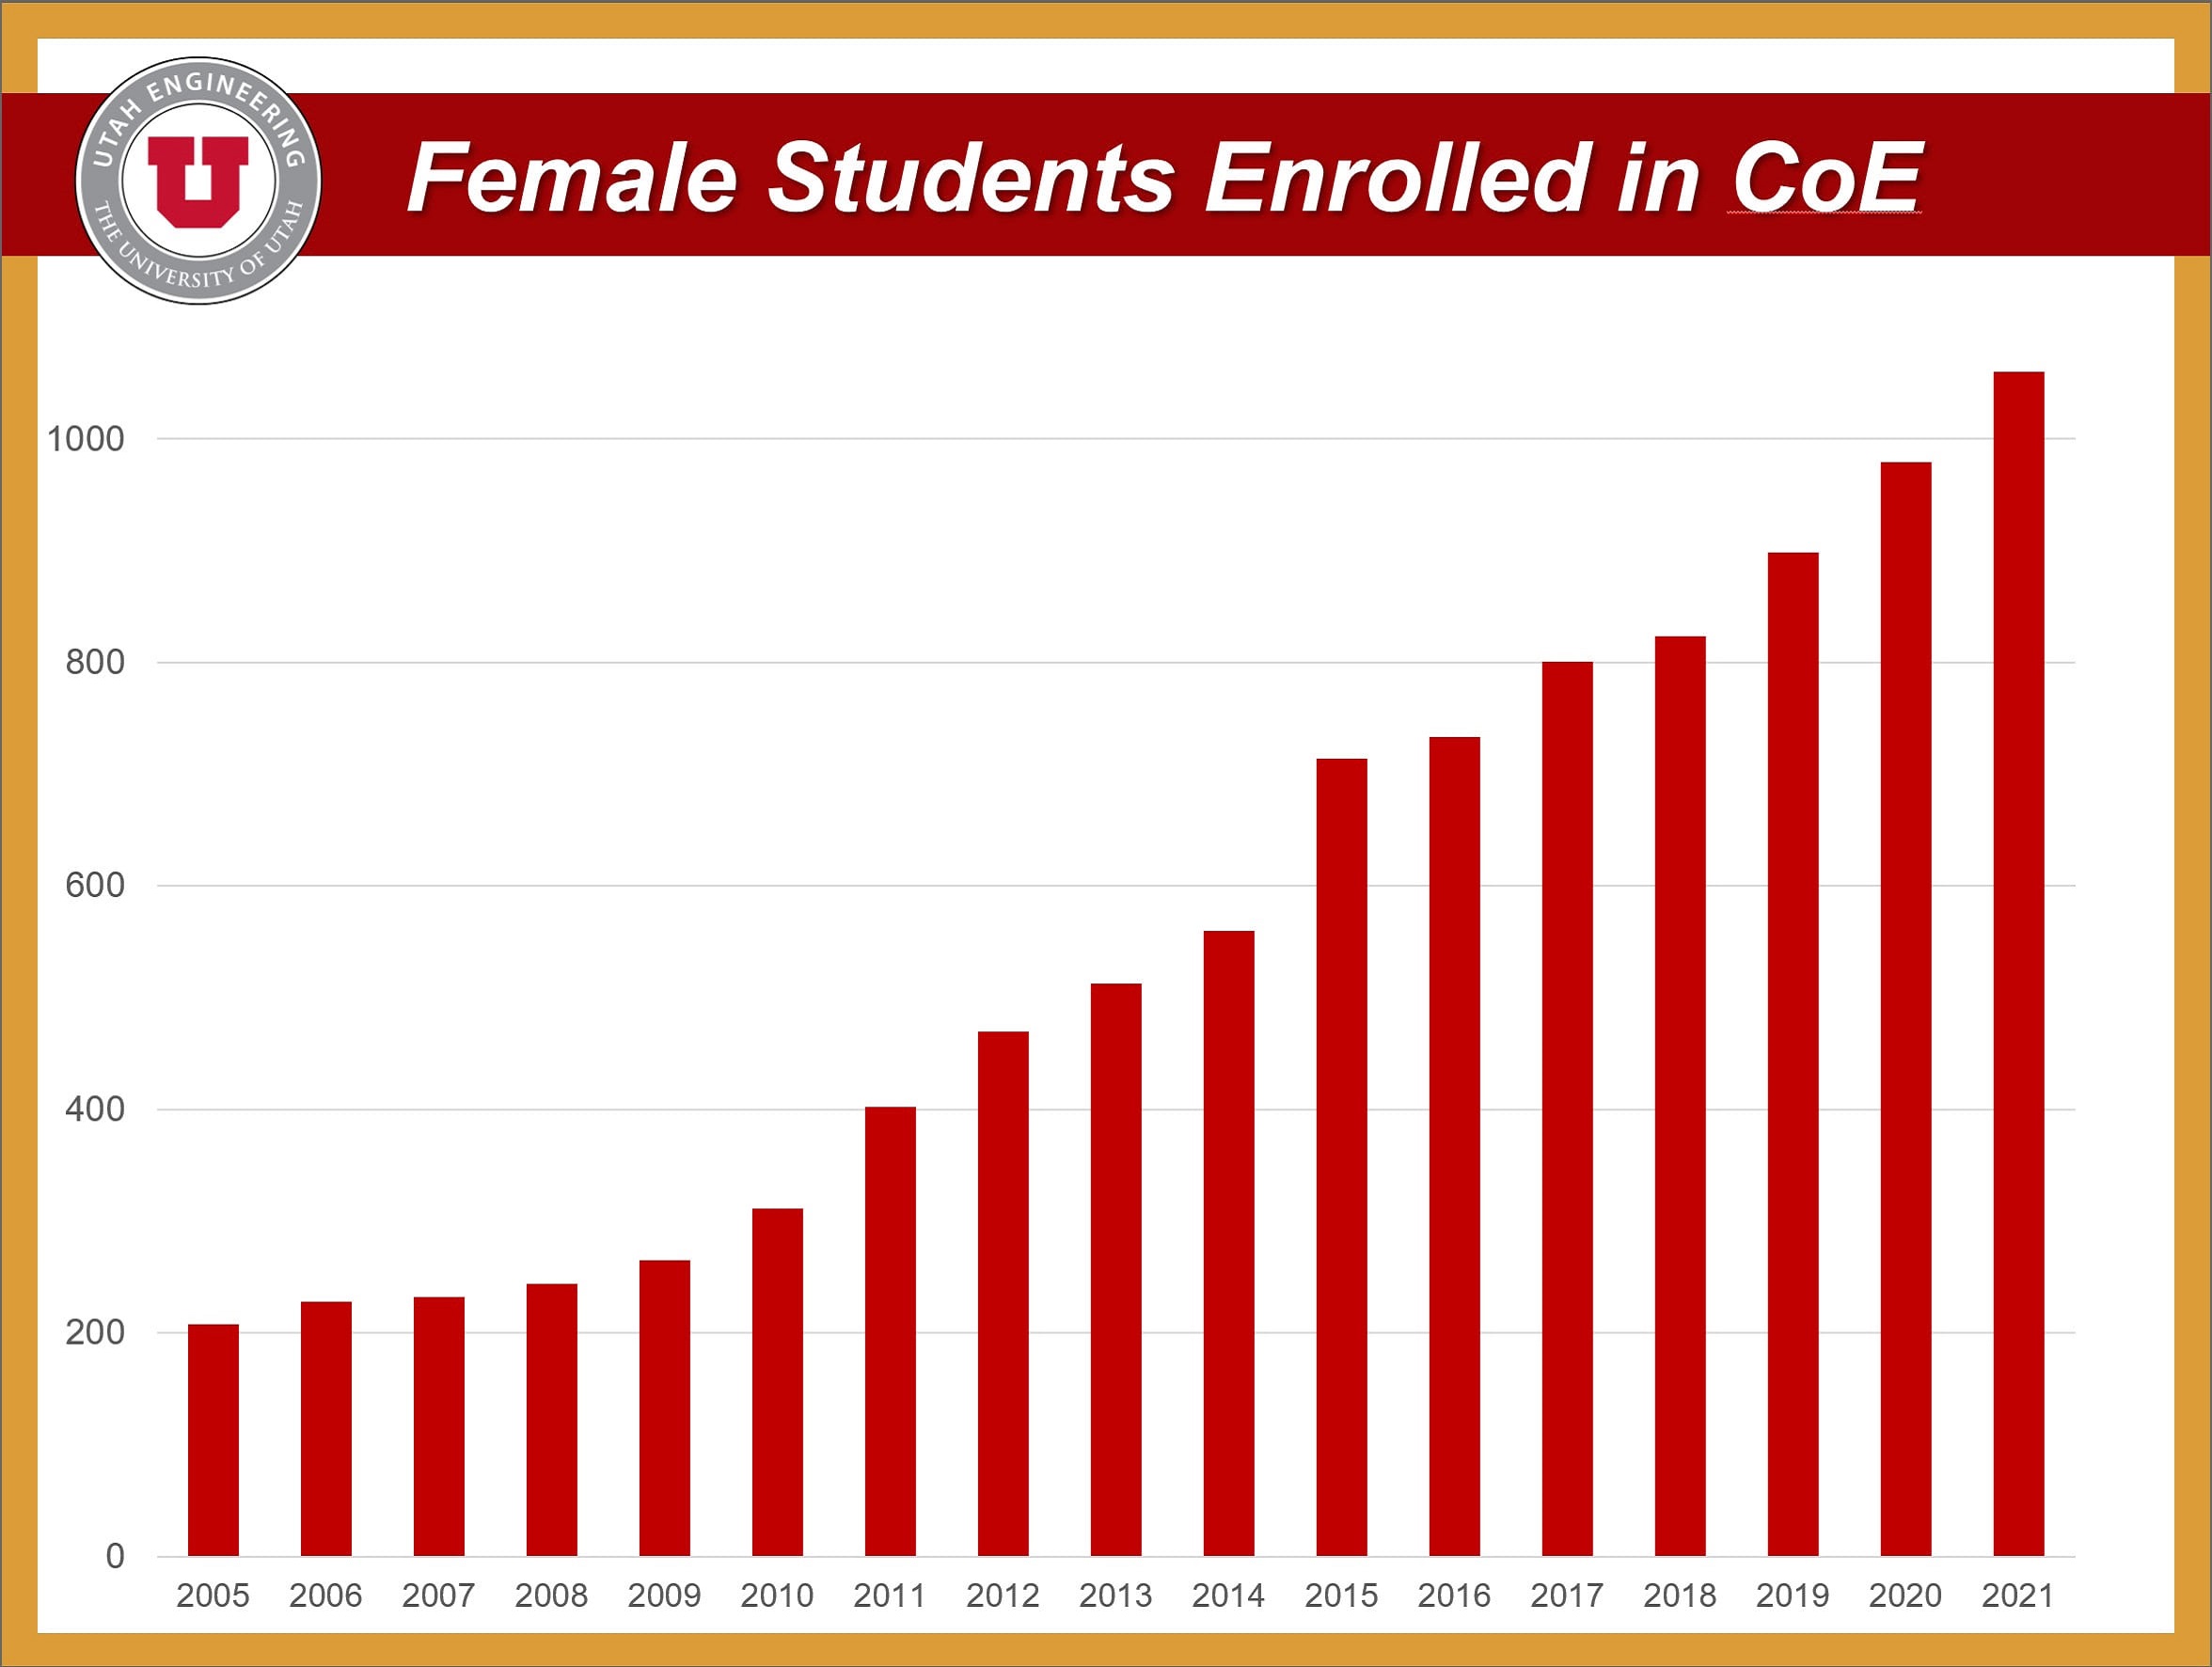 Graph of female students enrolled in the college of engineering from 2005 to 2021 with steady, gradual growth